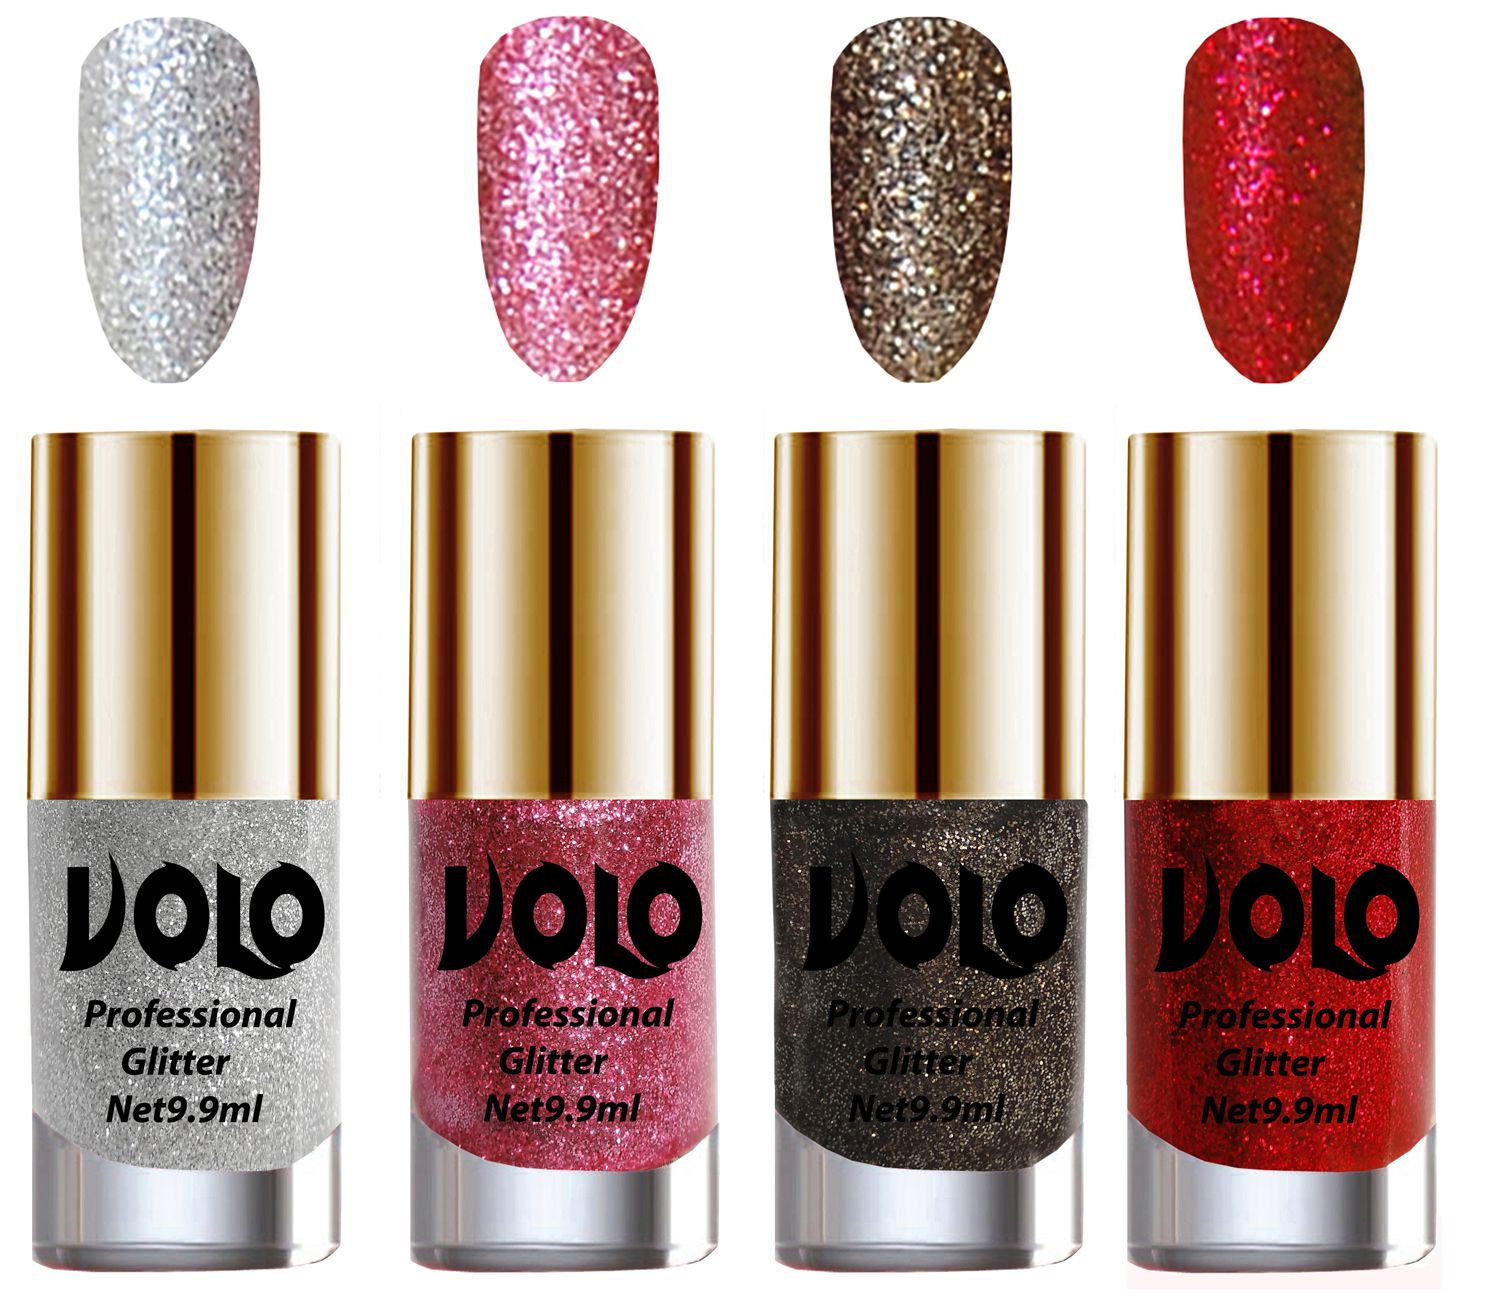     			VOLO Professionally Used Glitter Shine Nail Polish Silver,Pink,Grey Red Pack of 4 39 mL